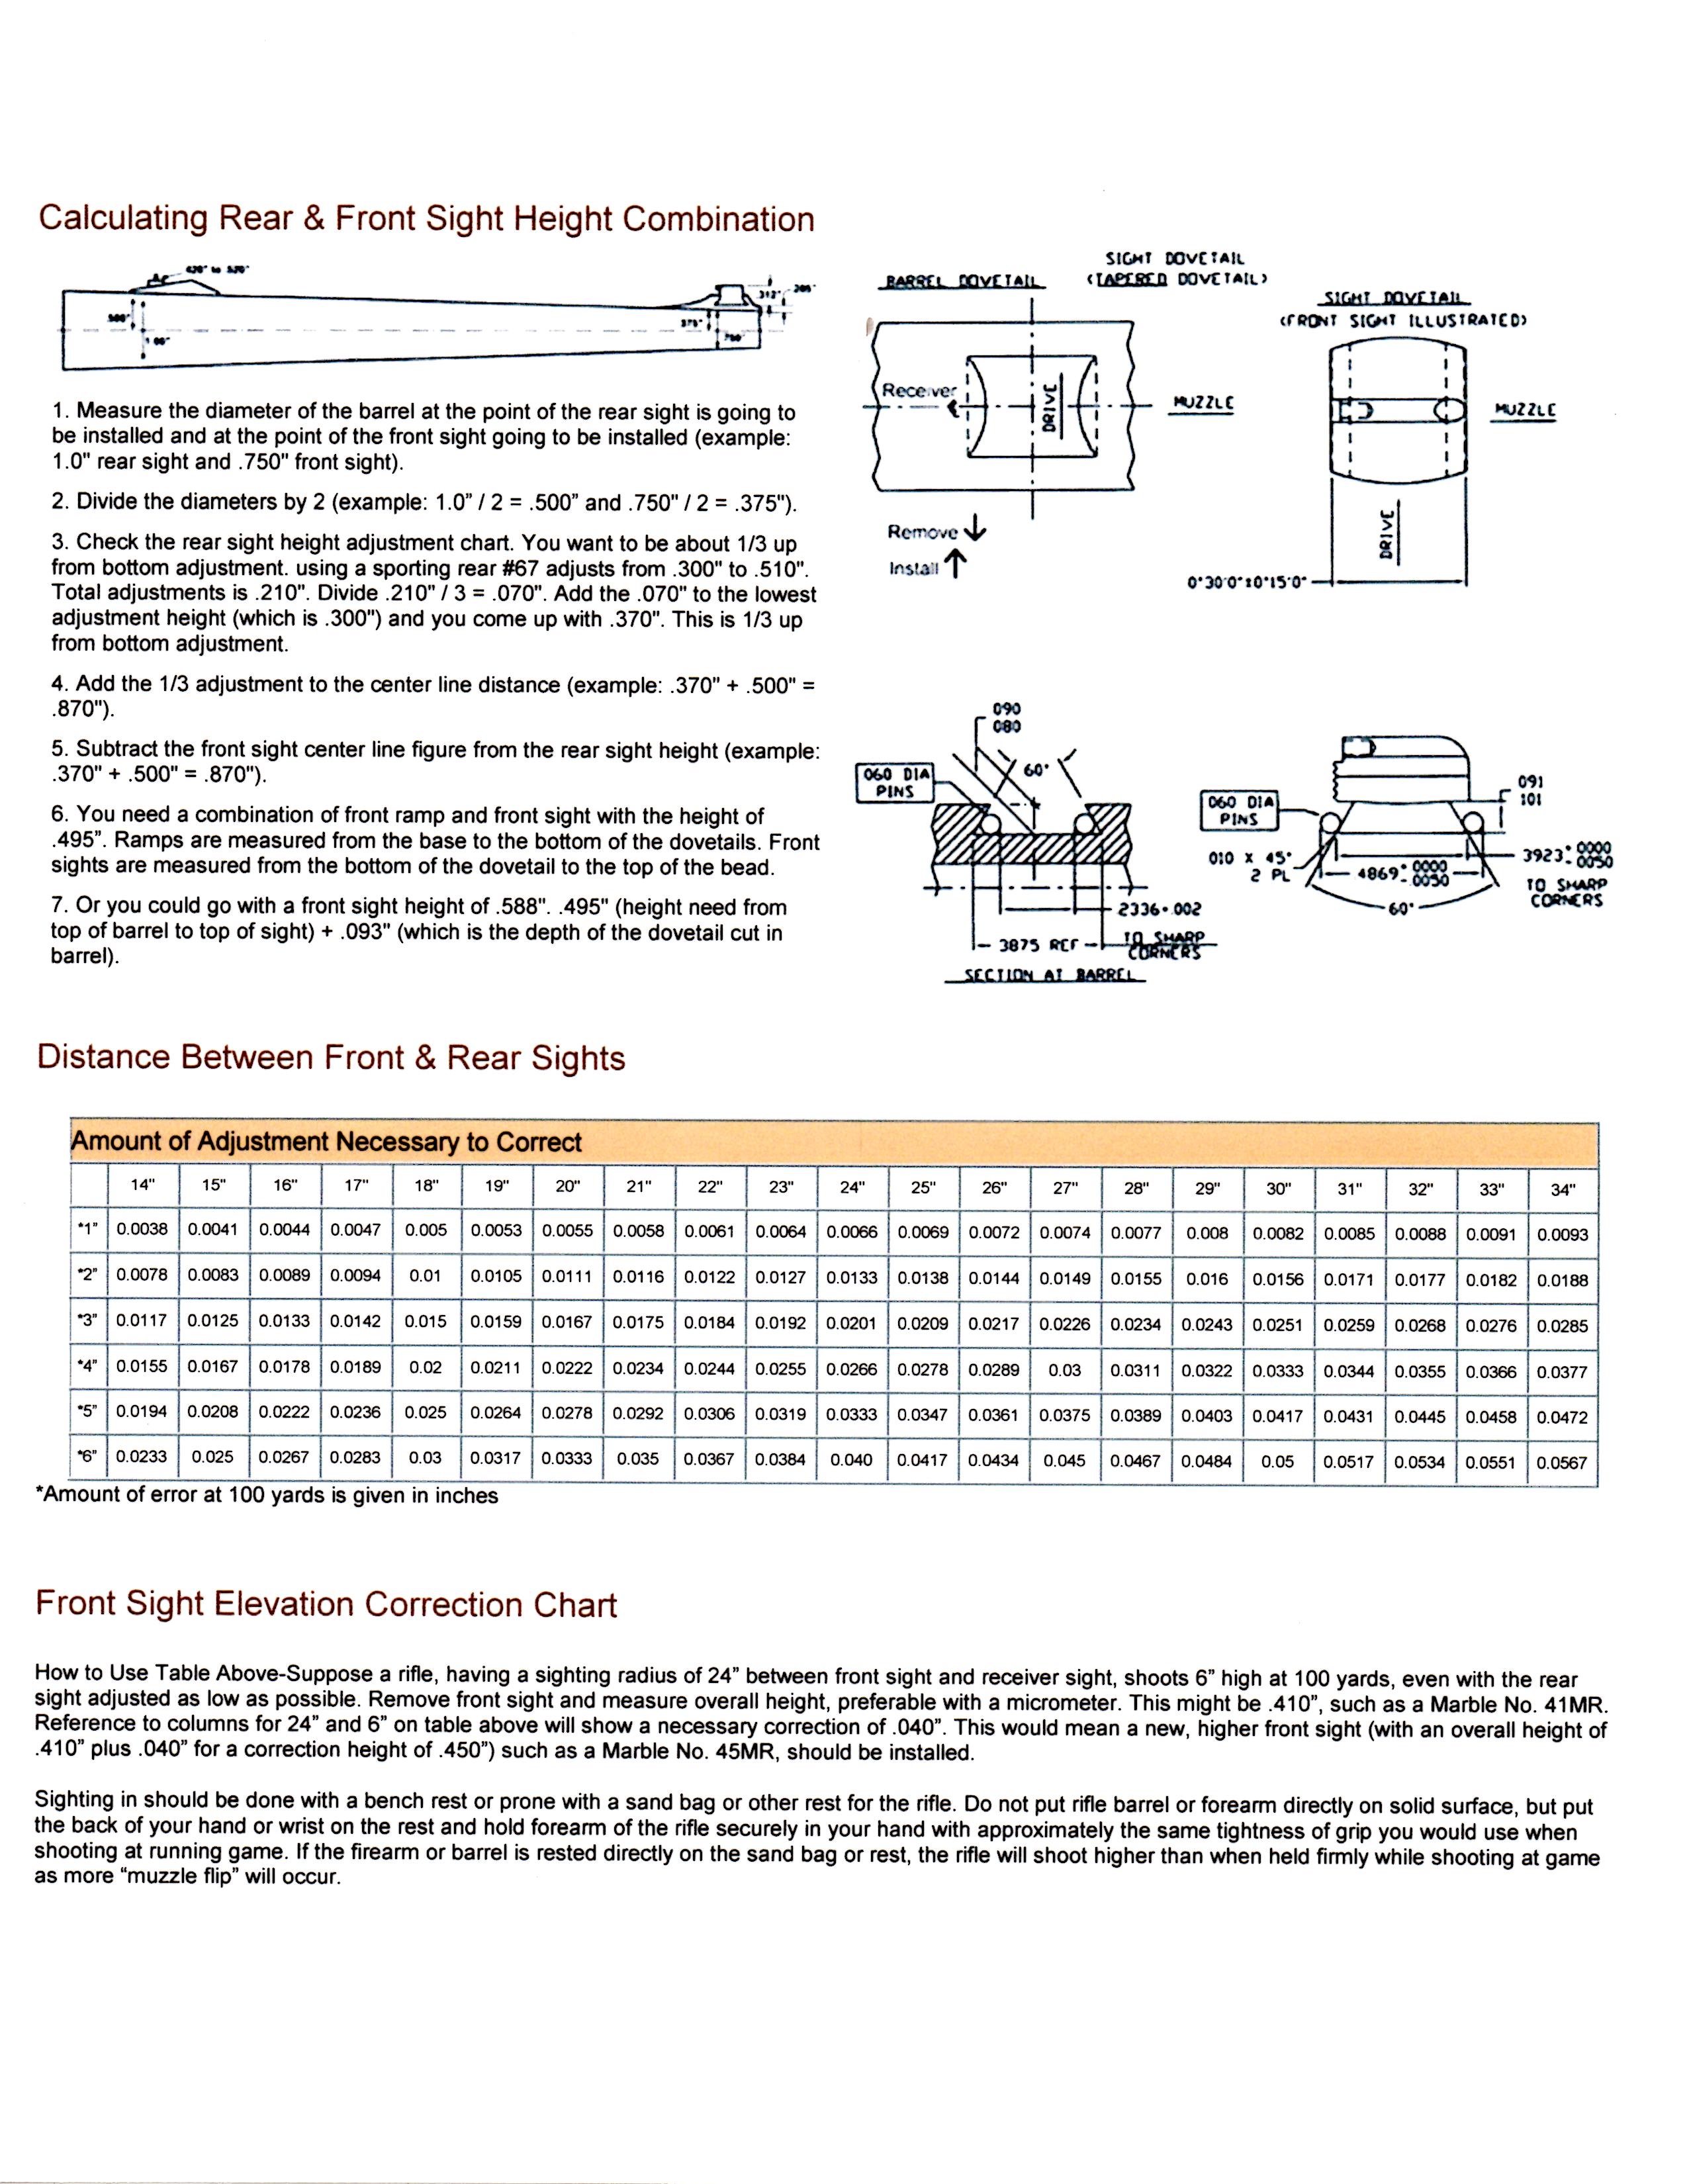 A FREE Download - Calculating Rear and Front Sight Heights